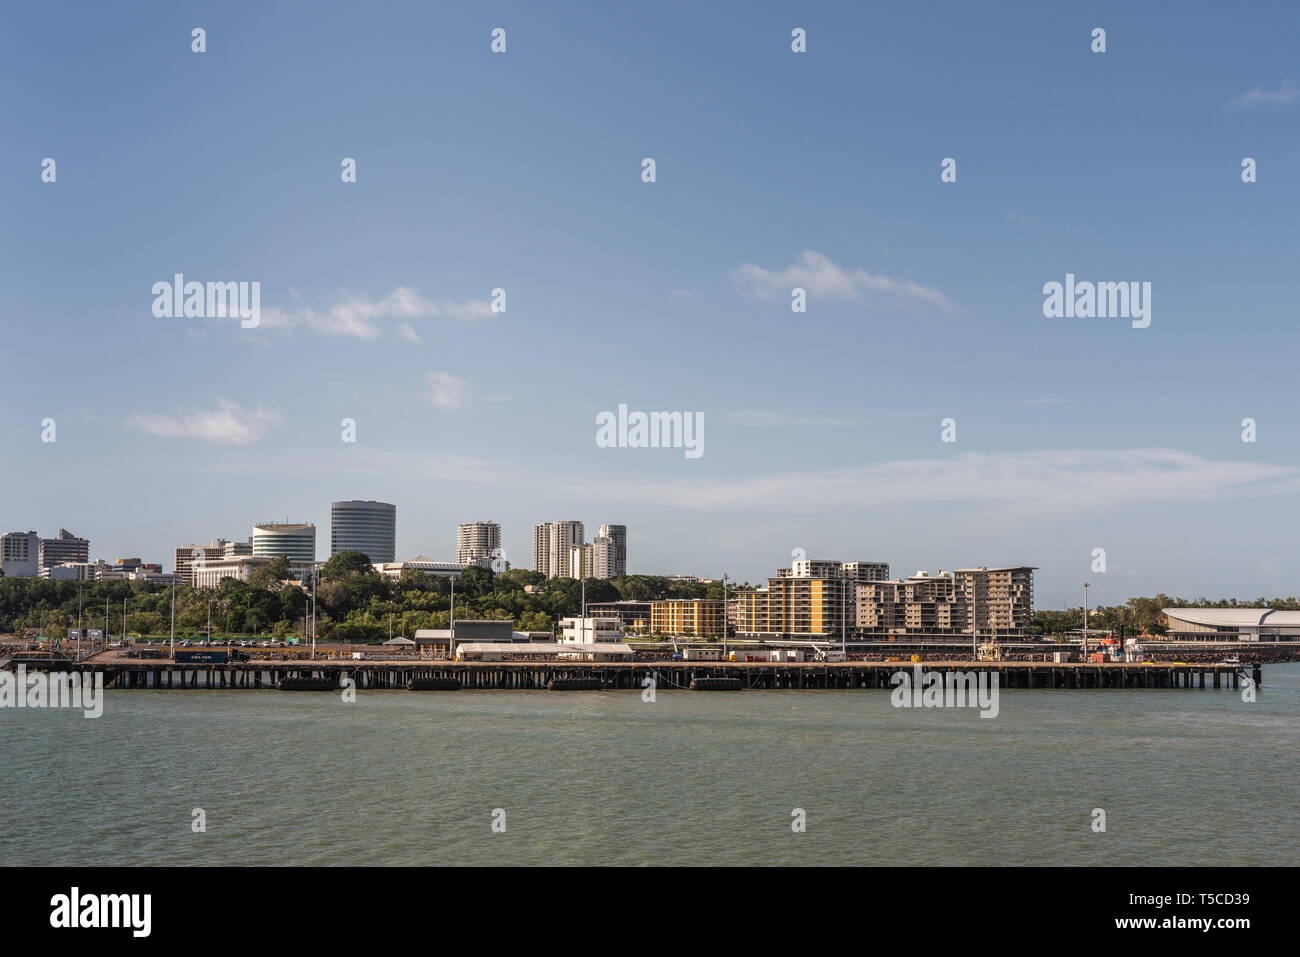 Darwin Australia - February 22, 2019: Darwin skyline seen from south upon harbour bay water under blue sky. Convention center to the right. Dock for l Stock Photo